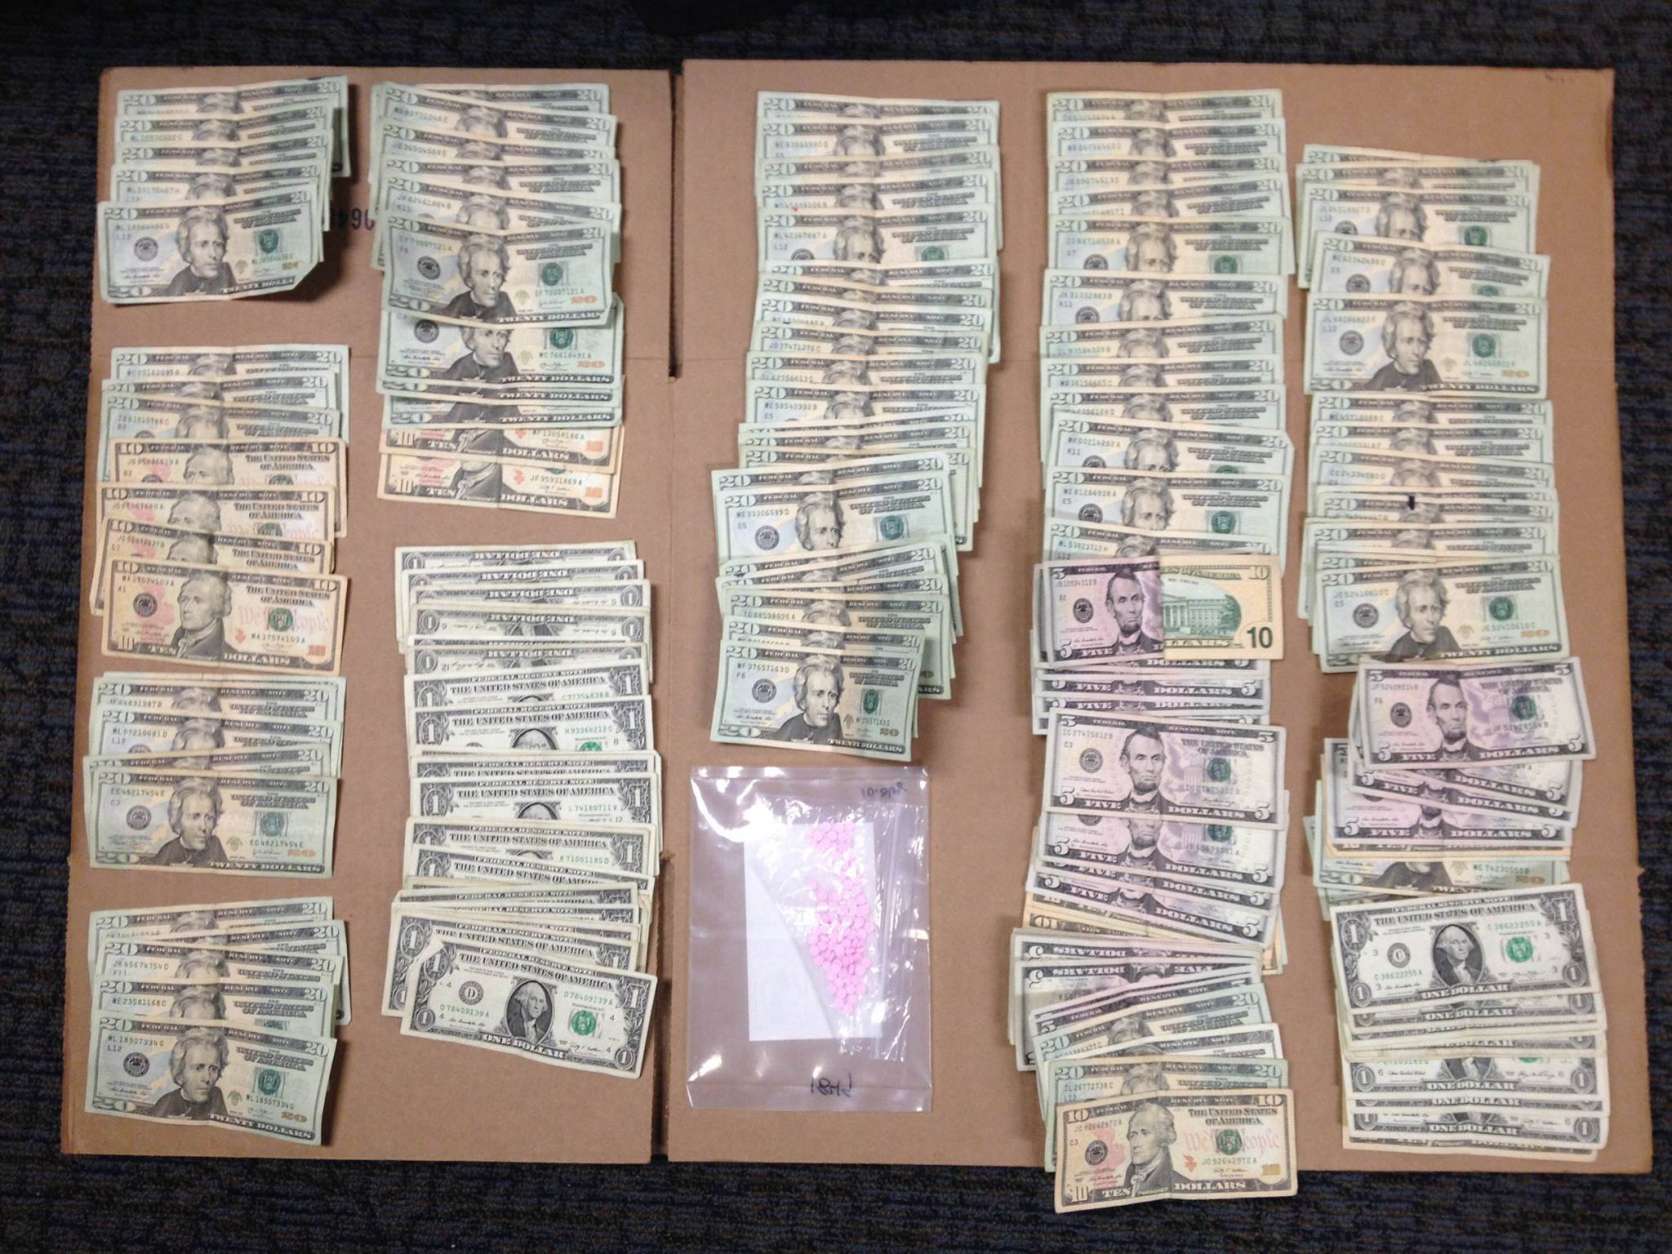 Anne Arundel County Detectives from the Western Tactical Patrol Unit recovered ninety 10mg oxycodone pills and more than $2,000 cash during a traffic stop on March 31, 2016. The suspect was traveling southbound 295 near Route 32 in Laurel when he threw a baggie out the passenger side window. Detectives also seized a 5 inch steak knife. The charges against the suspect include possession with the intent to distribute and multiple traffic charges. (Courtesy Anne Arundel County Police)